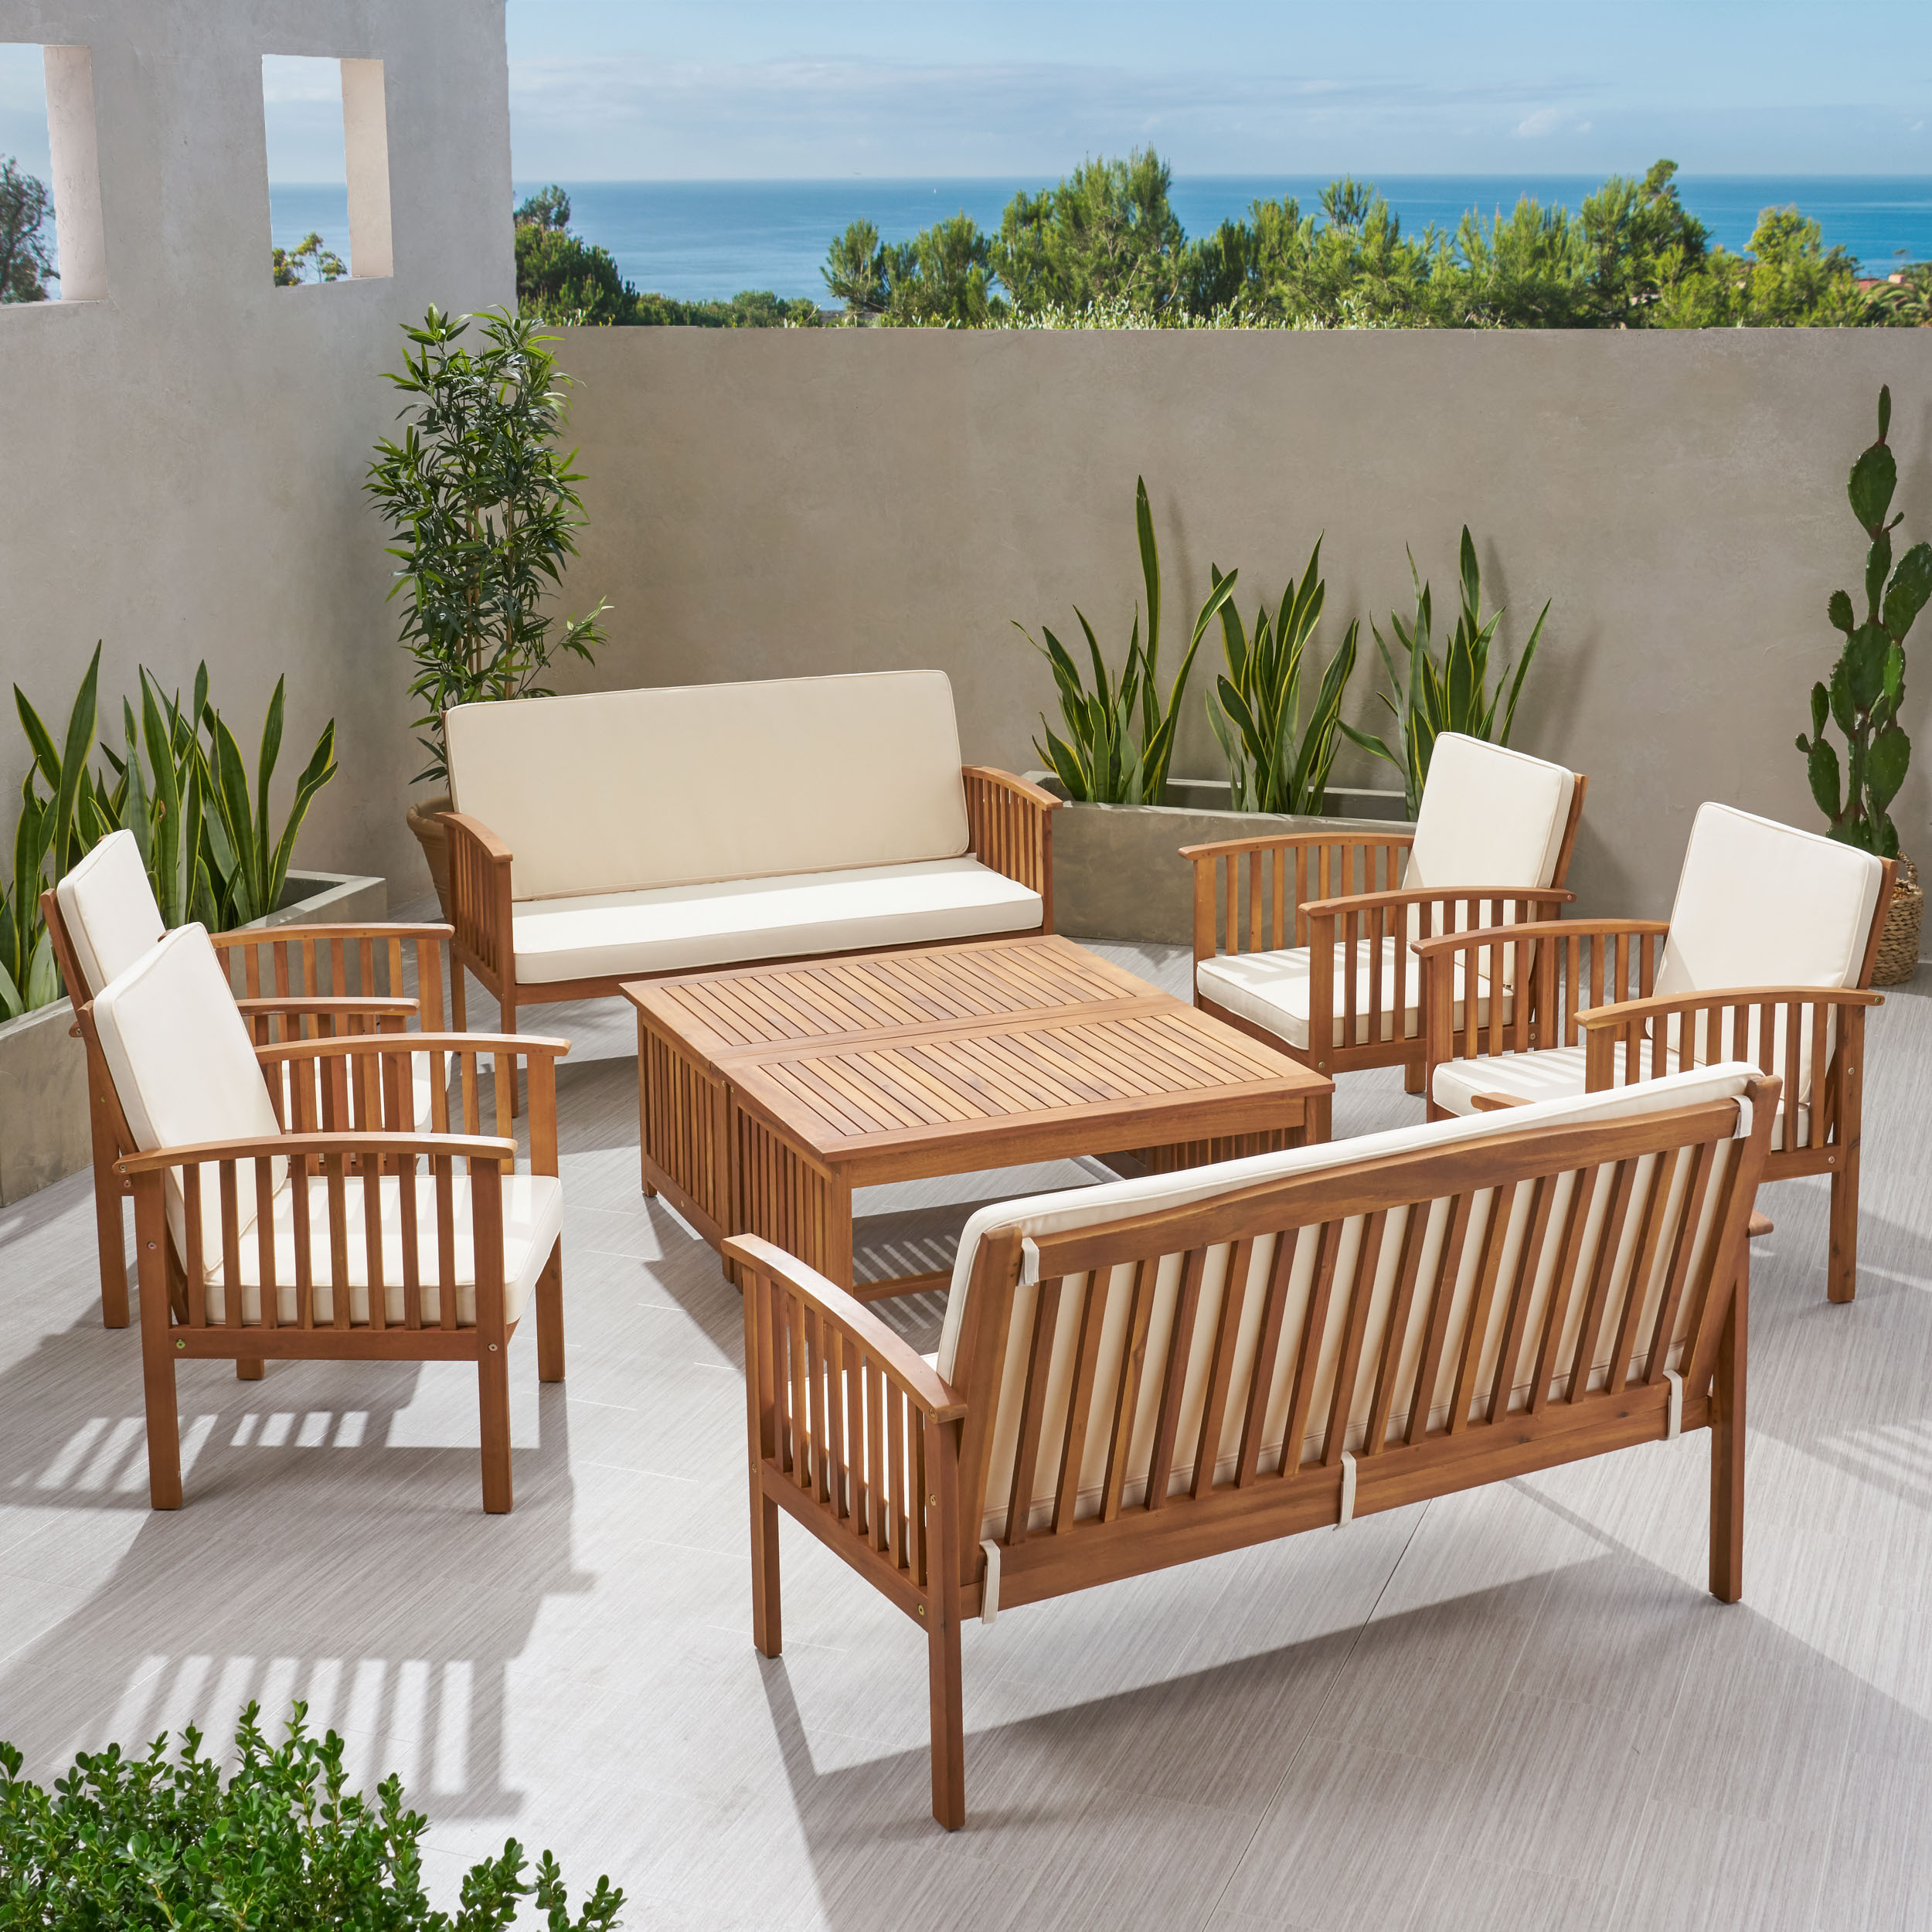 Tucson Outdoor Acacia Wood 8 Seater Sectional Sofa Chat Set with Cushions - image 4 of 8